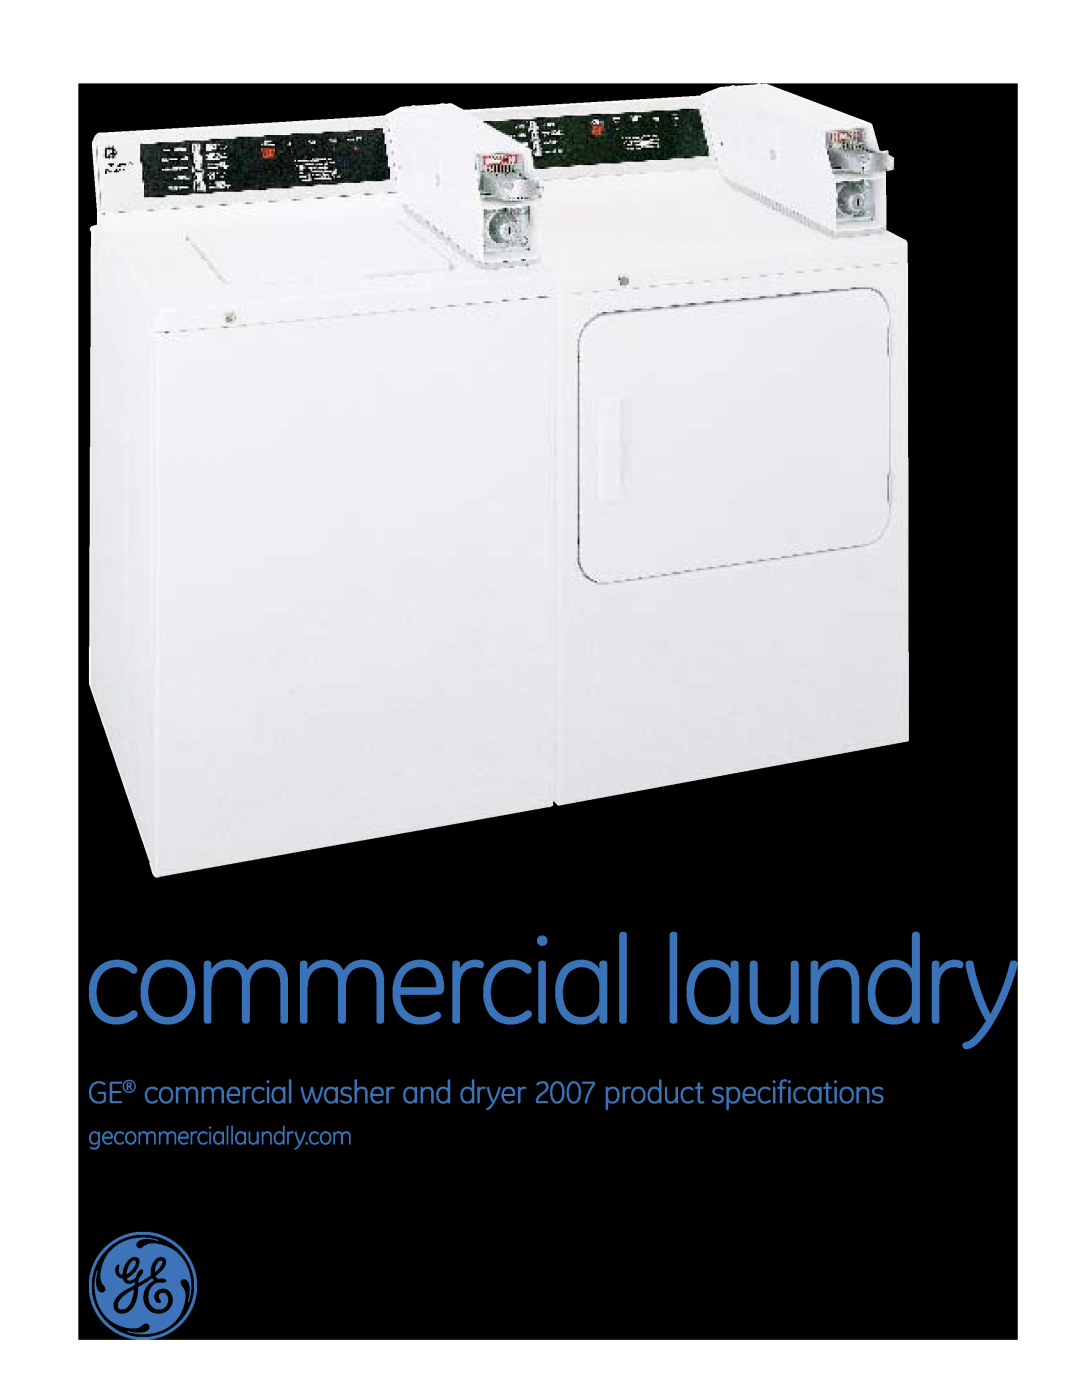 GE specifications commercial laundry, GE commercial washer and dryer 2007 product specifications 